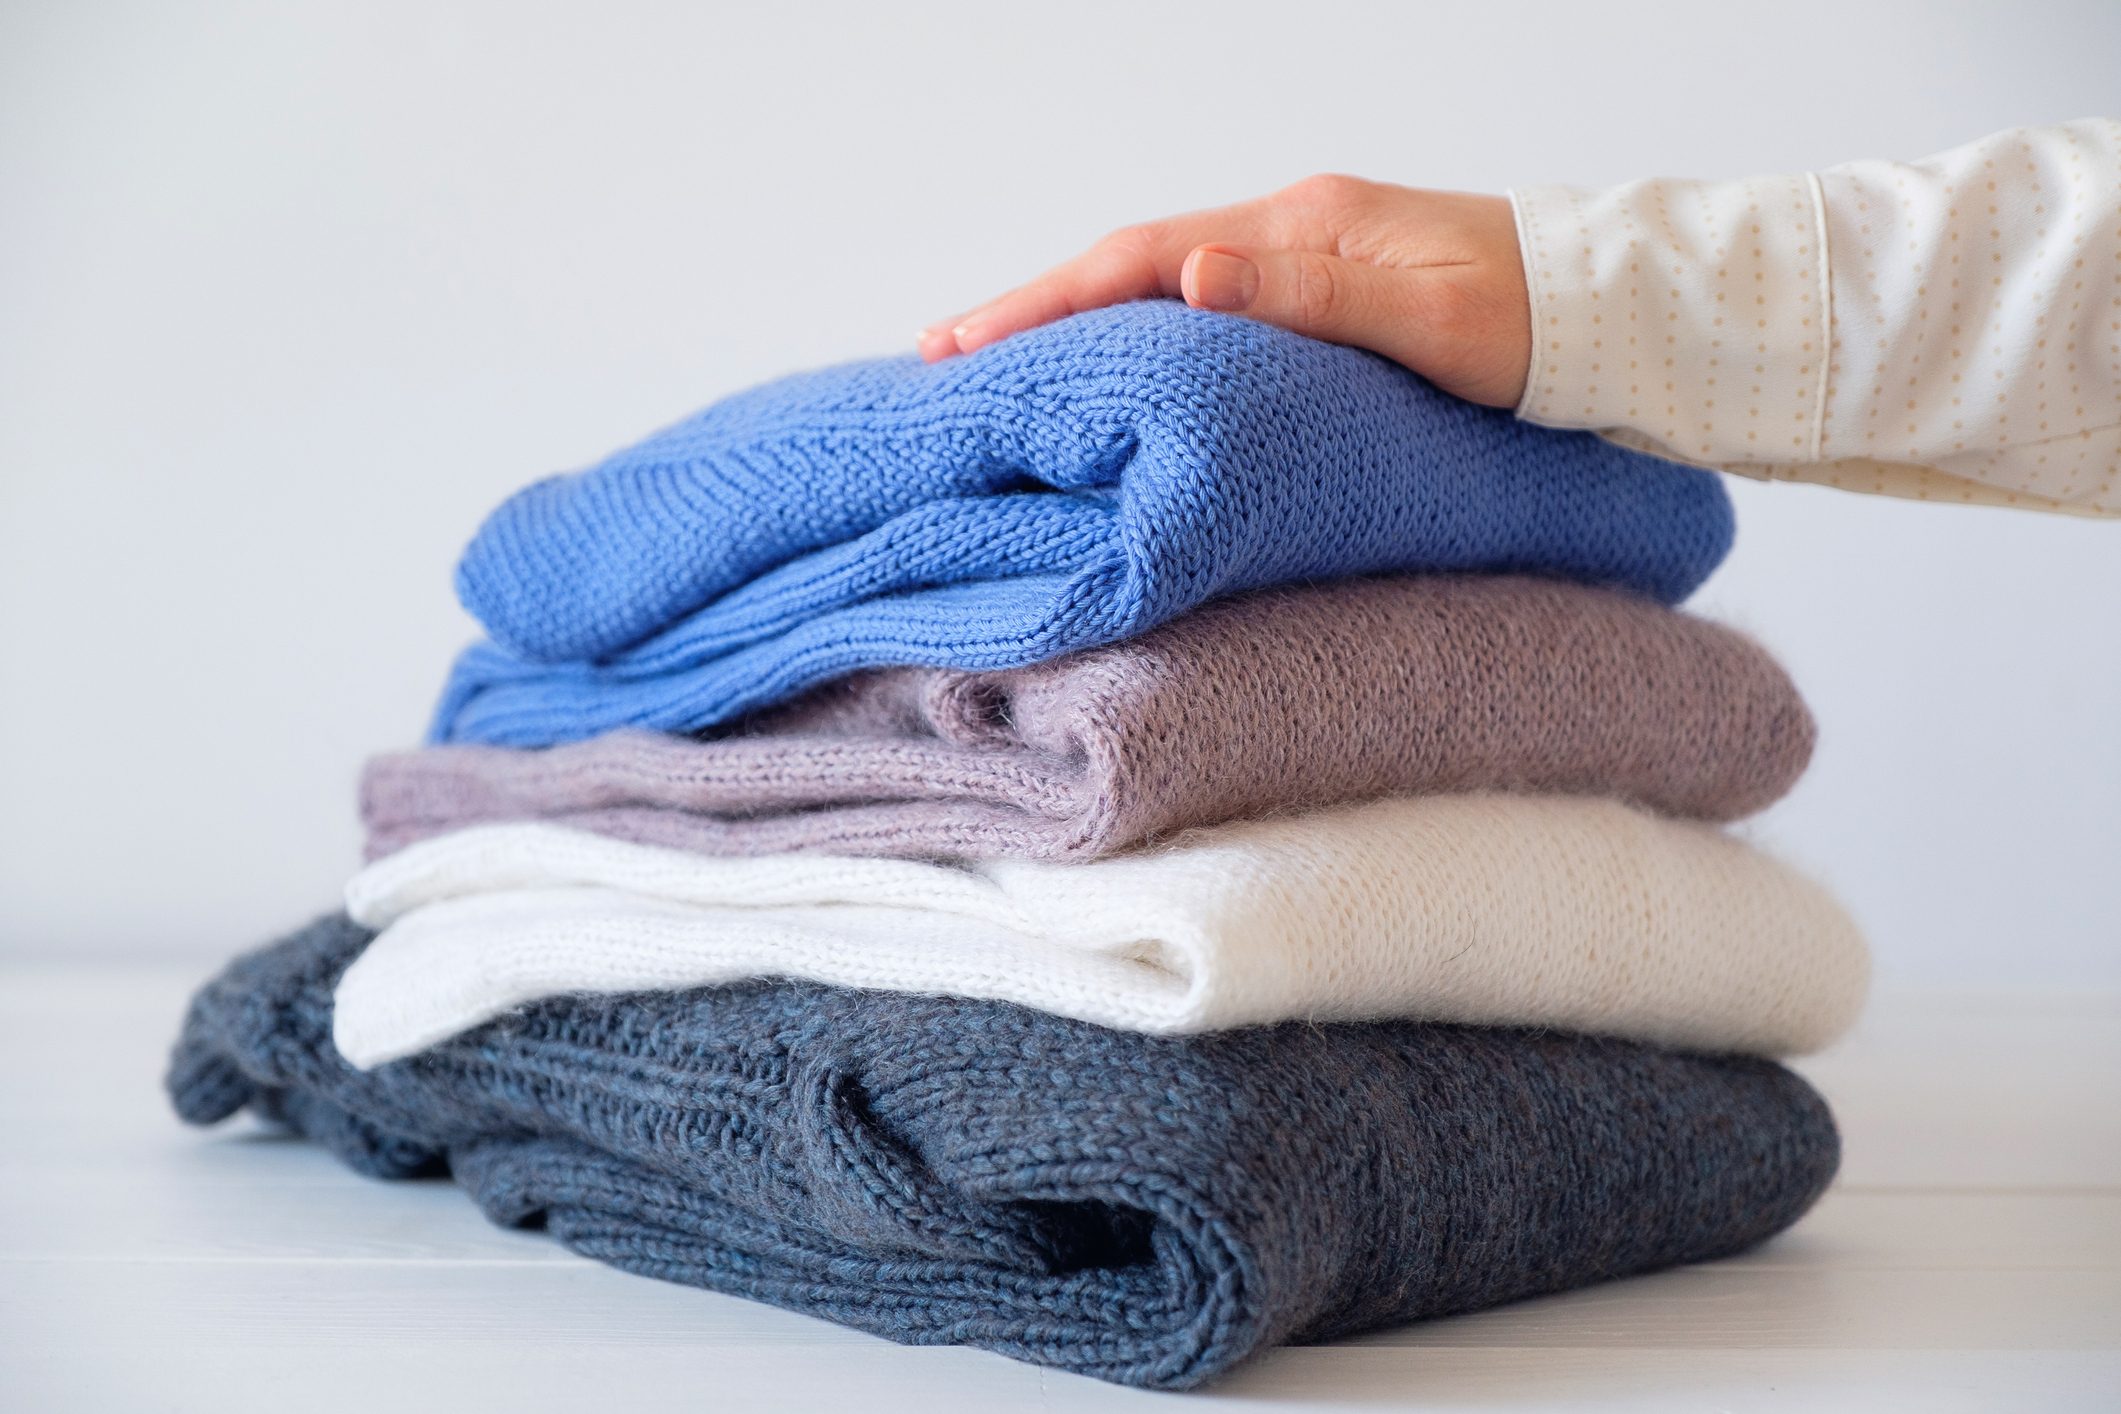 Oxwash  Tips on Rescuing and Preventing Shrunken Clothes - Oxwash